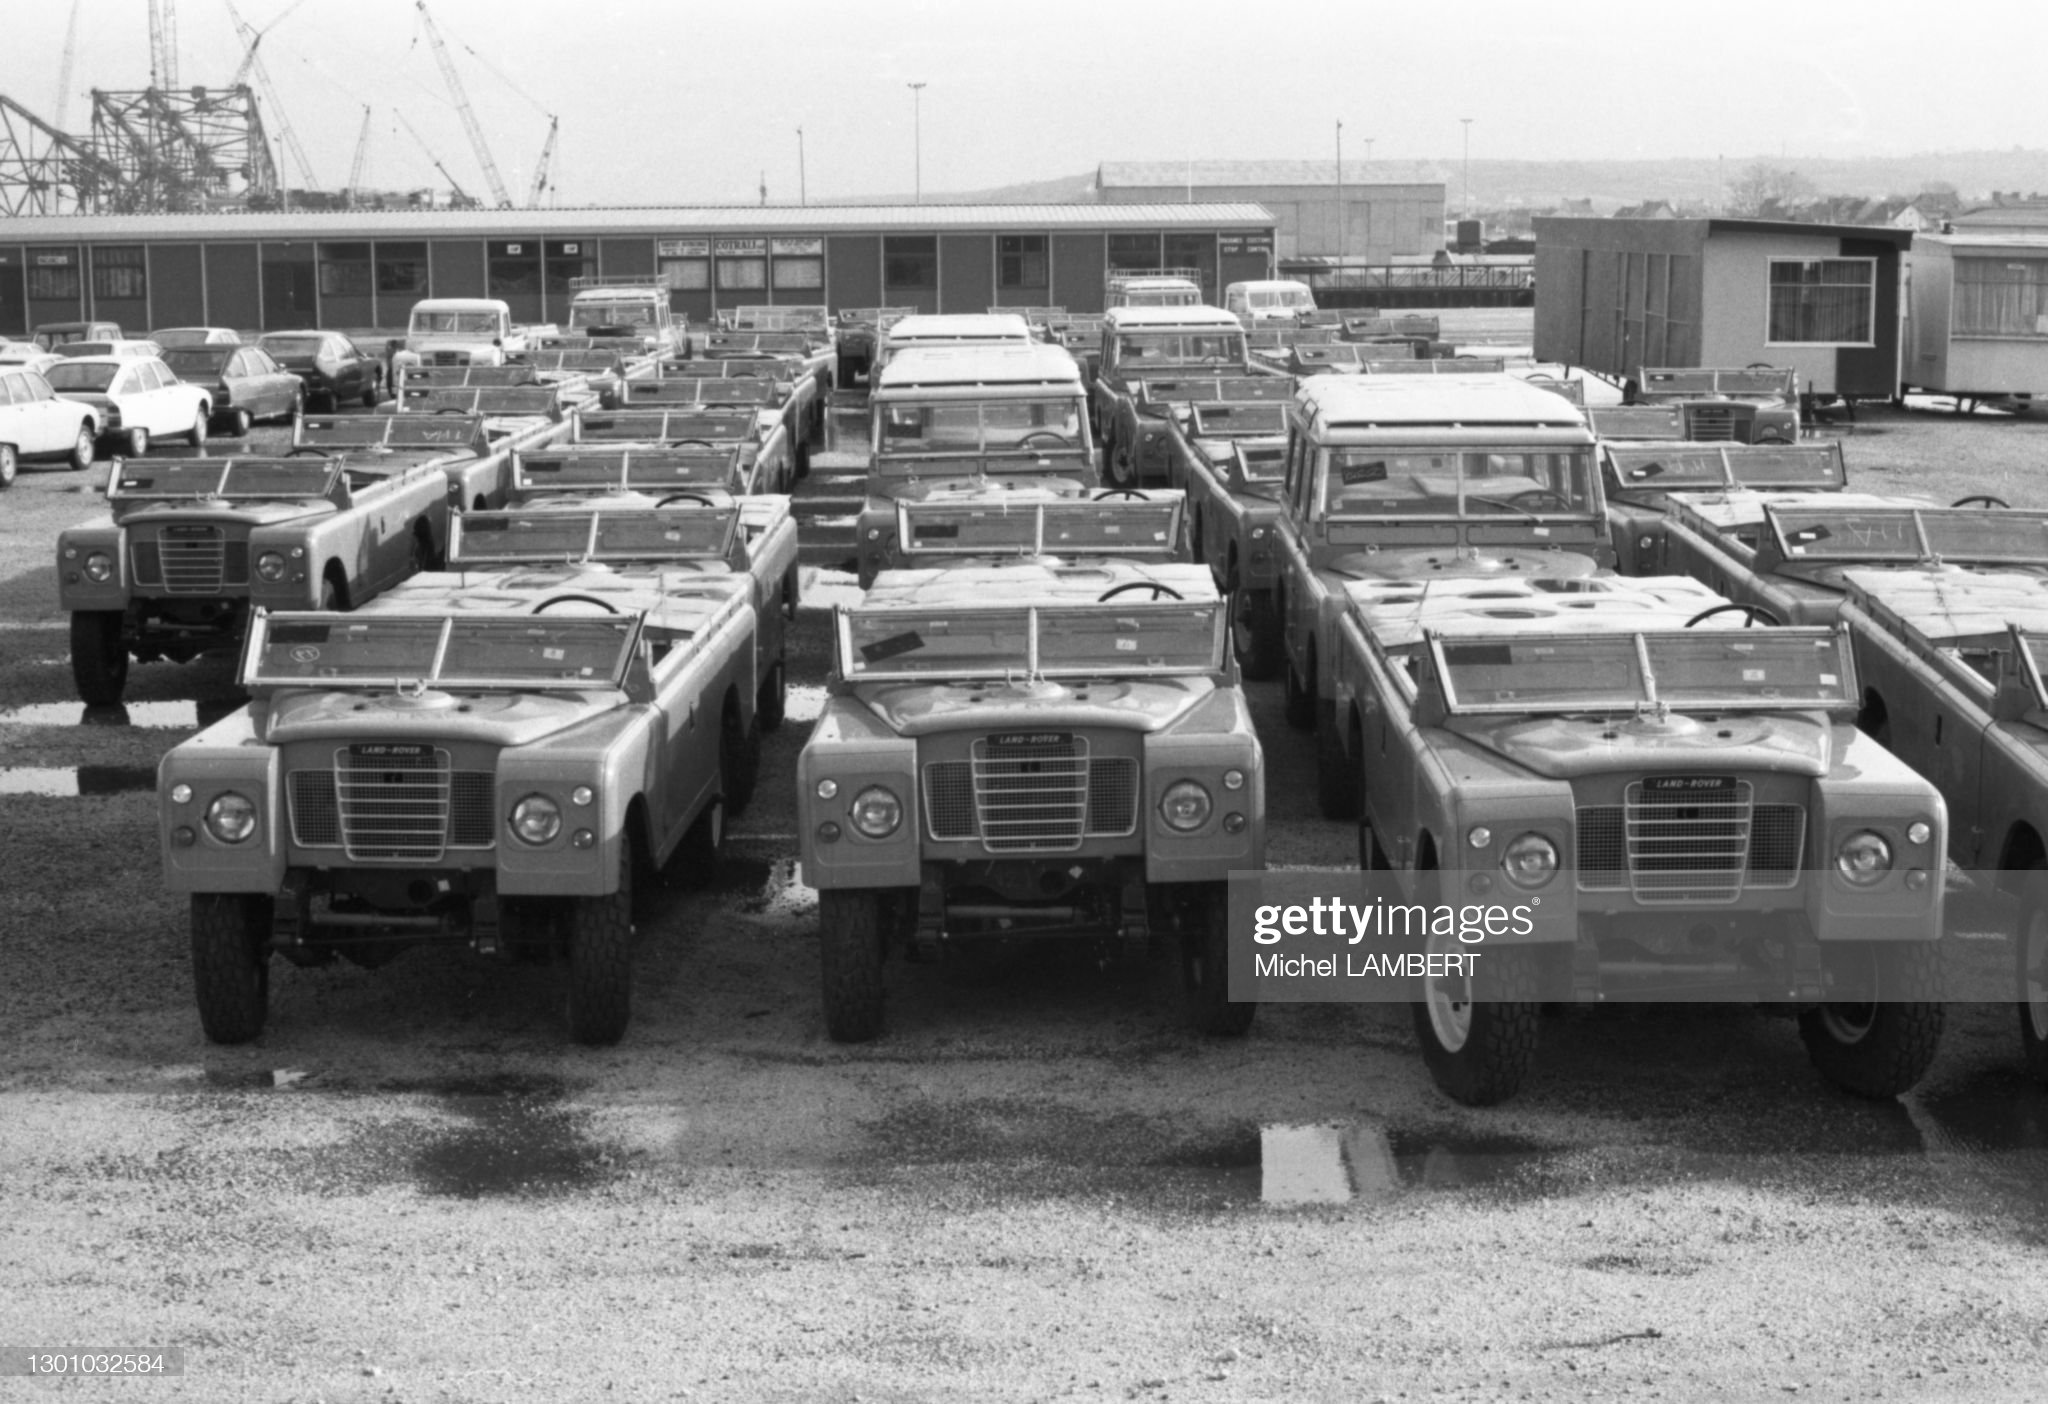 Land Rover series III on a quay in the port of Cherbourg, France, in February 1977.